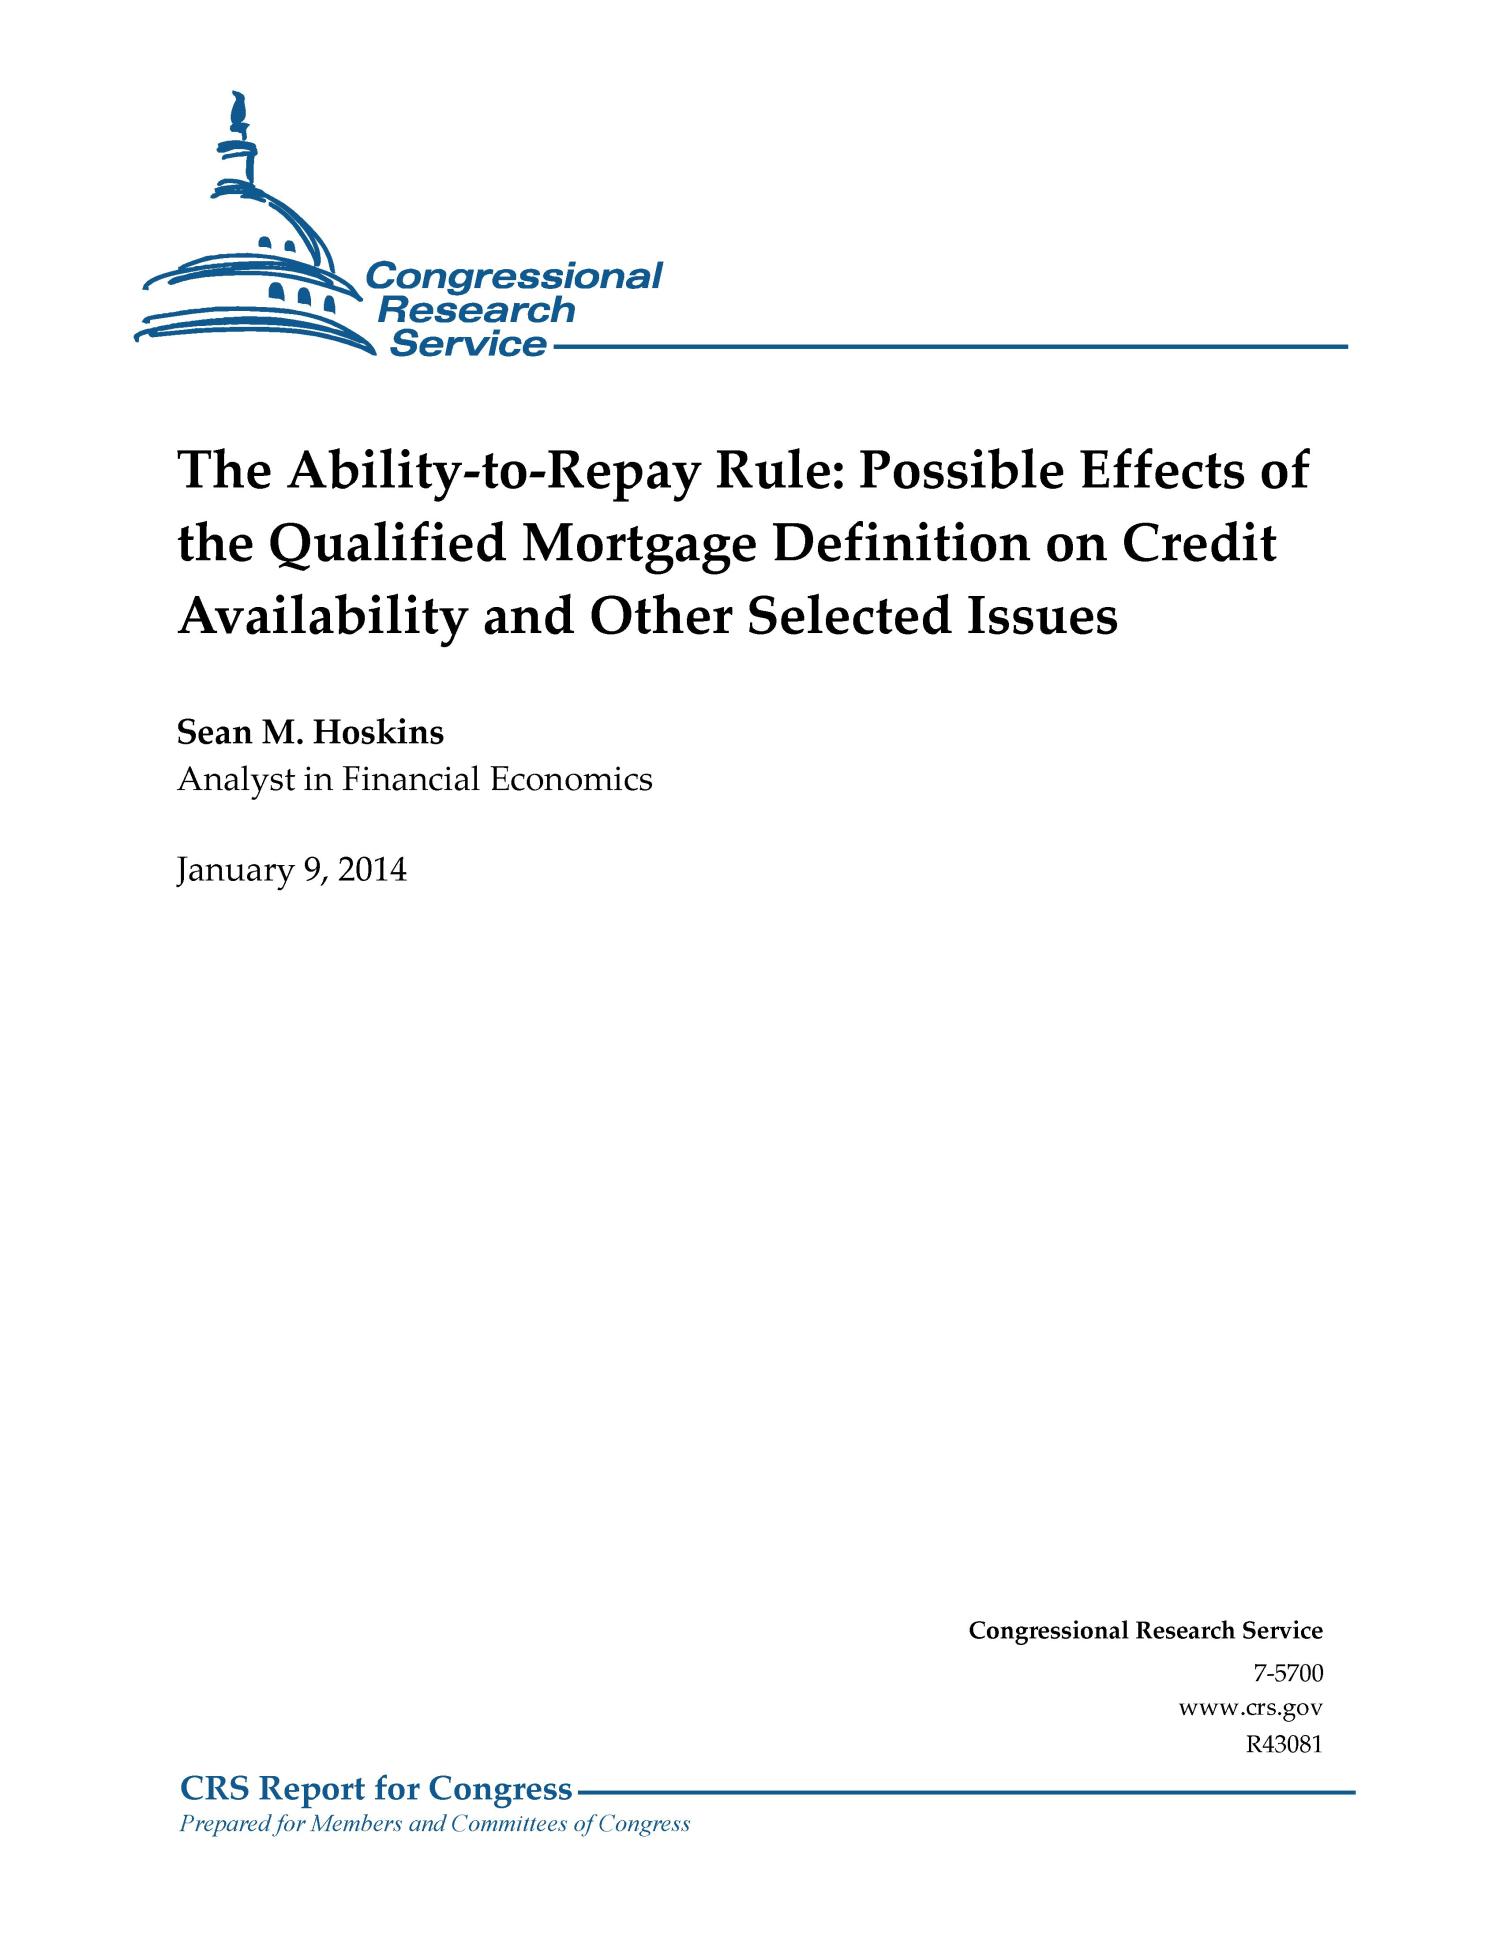 The Ability-to-Repay Rule: Possible Effects of the Qualified Mortgage Definition on Credit Availability and Other Selected Issues
                                                
                                                    [Sequence #]: 1 of 22
                                                